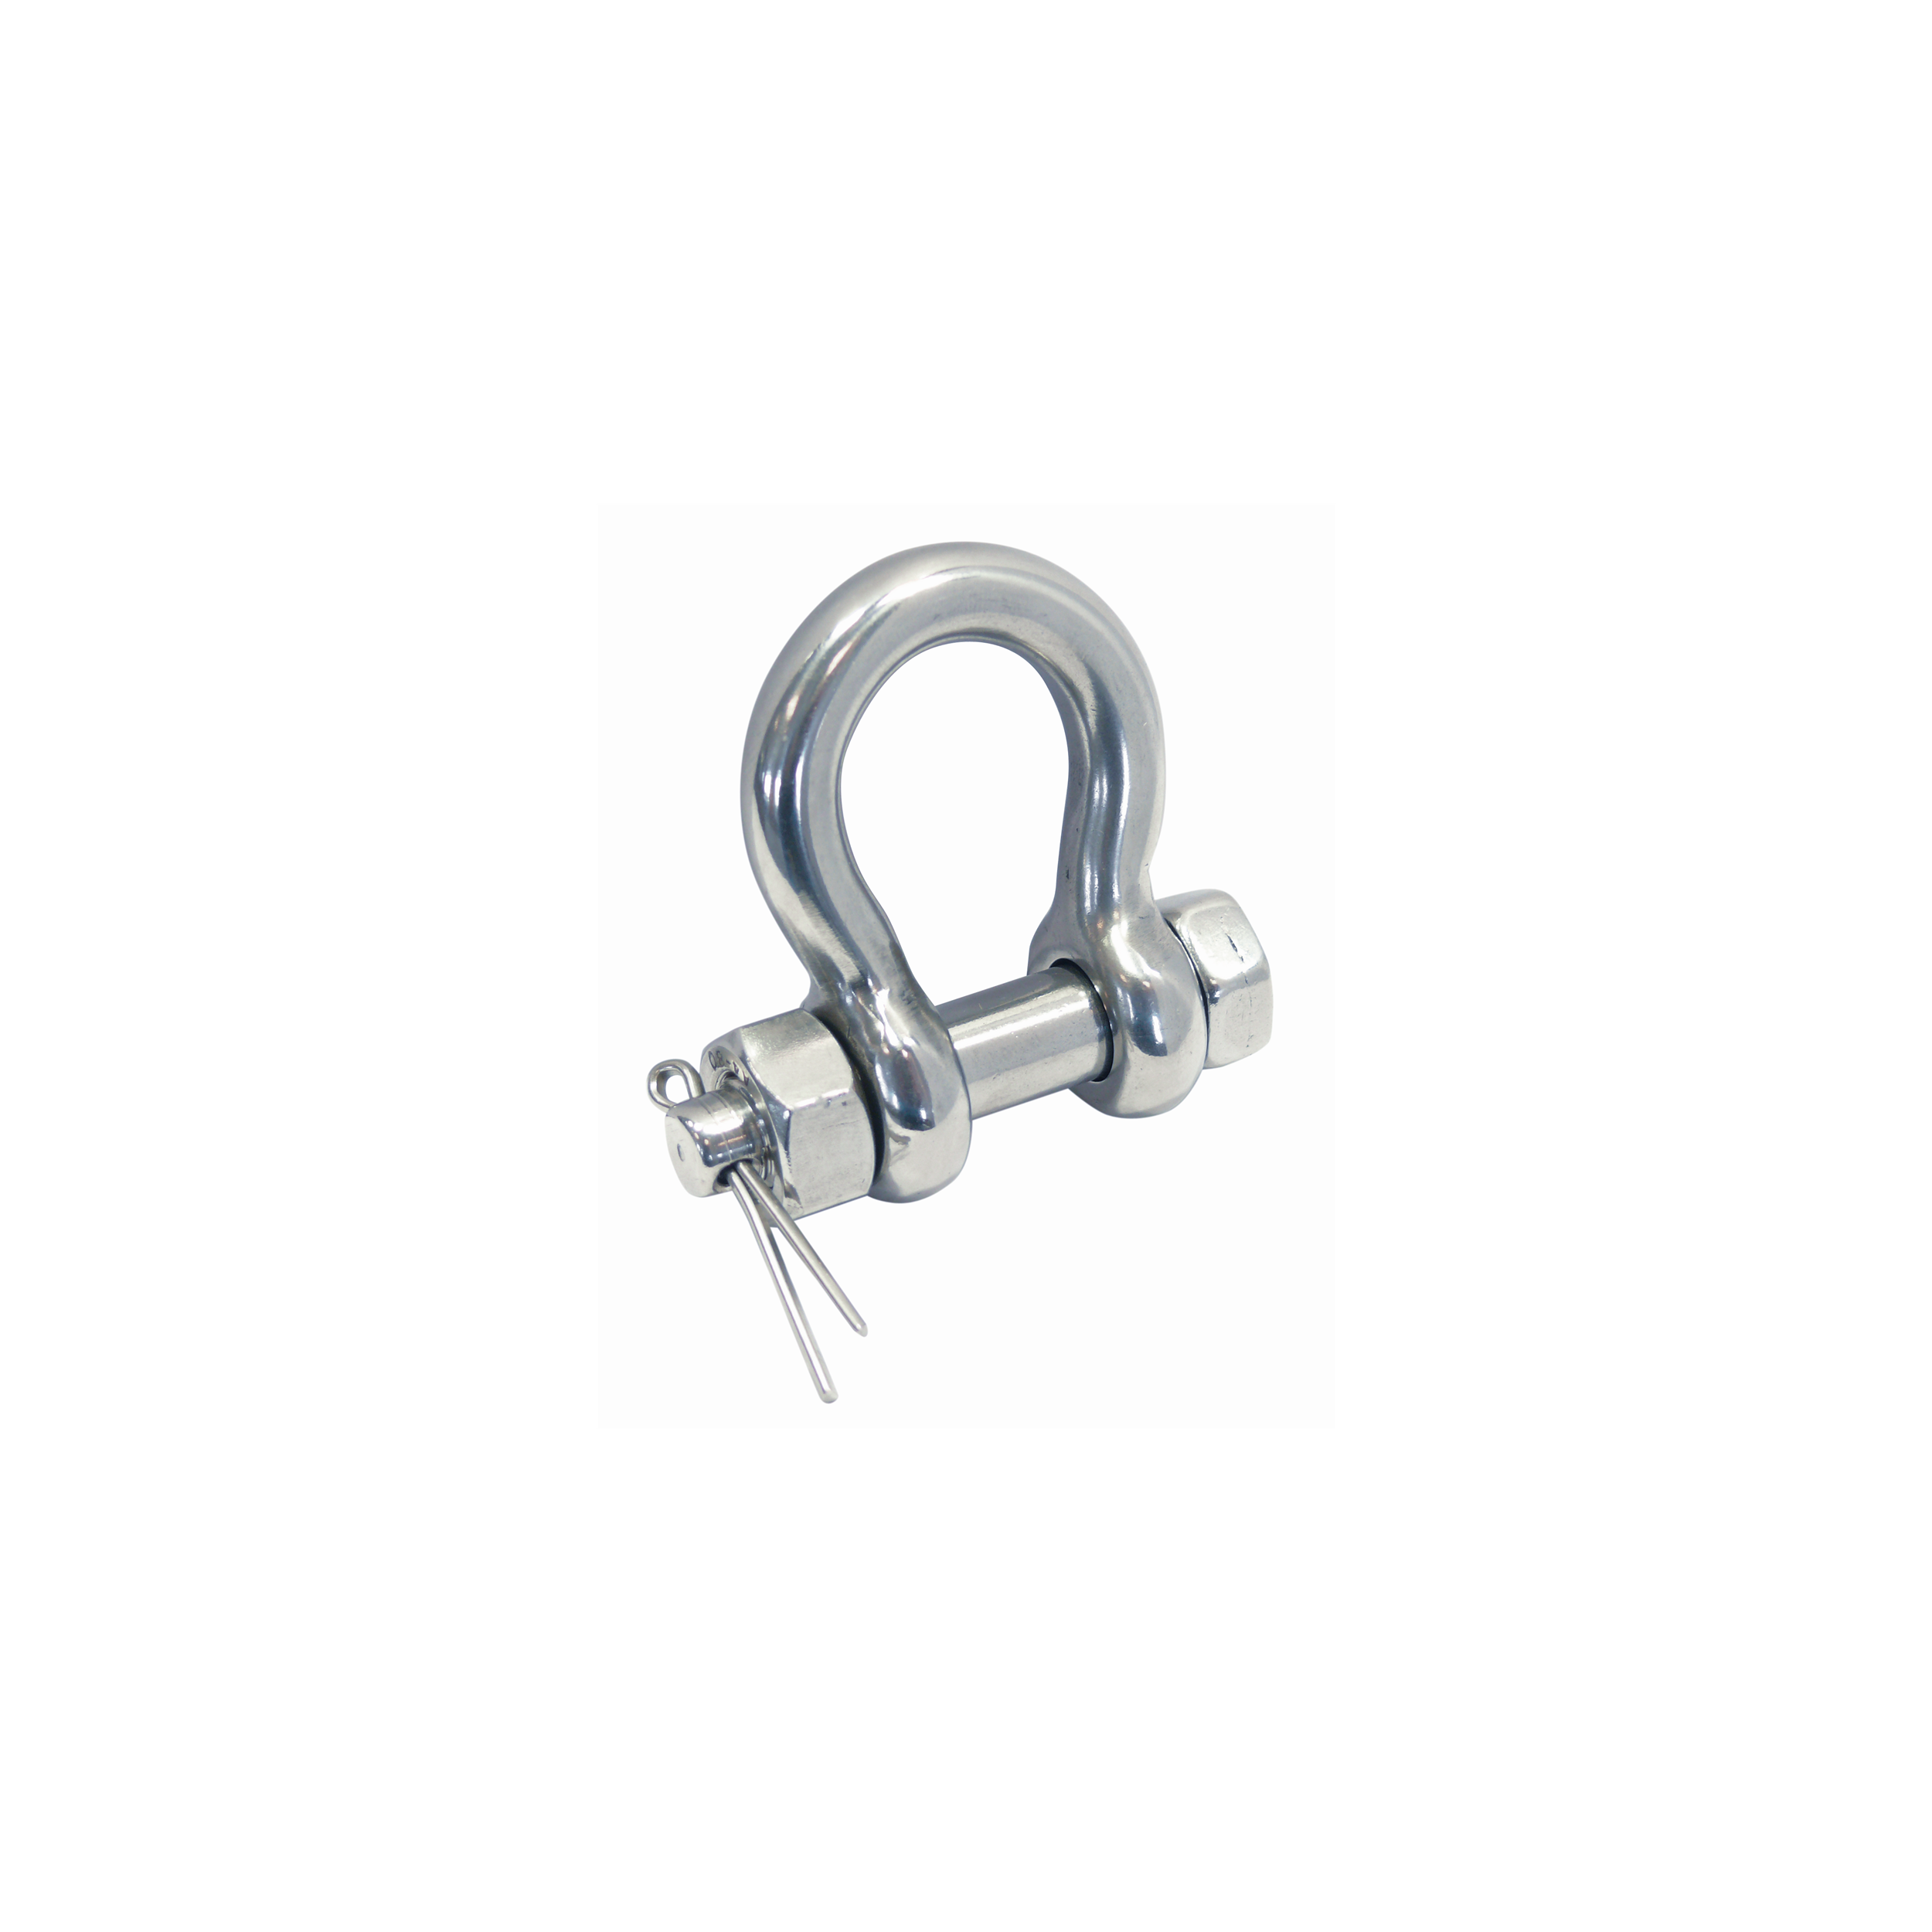 Bow shackle with secure bolt A4  bolt 16mm, bow 12mm